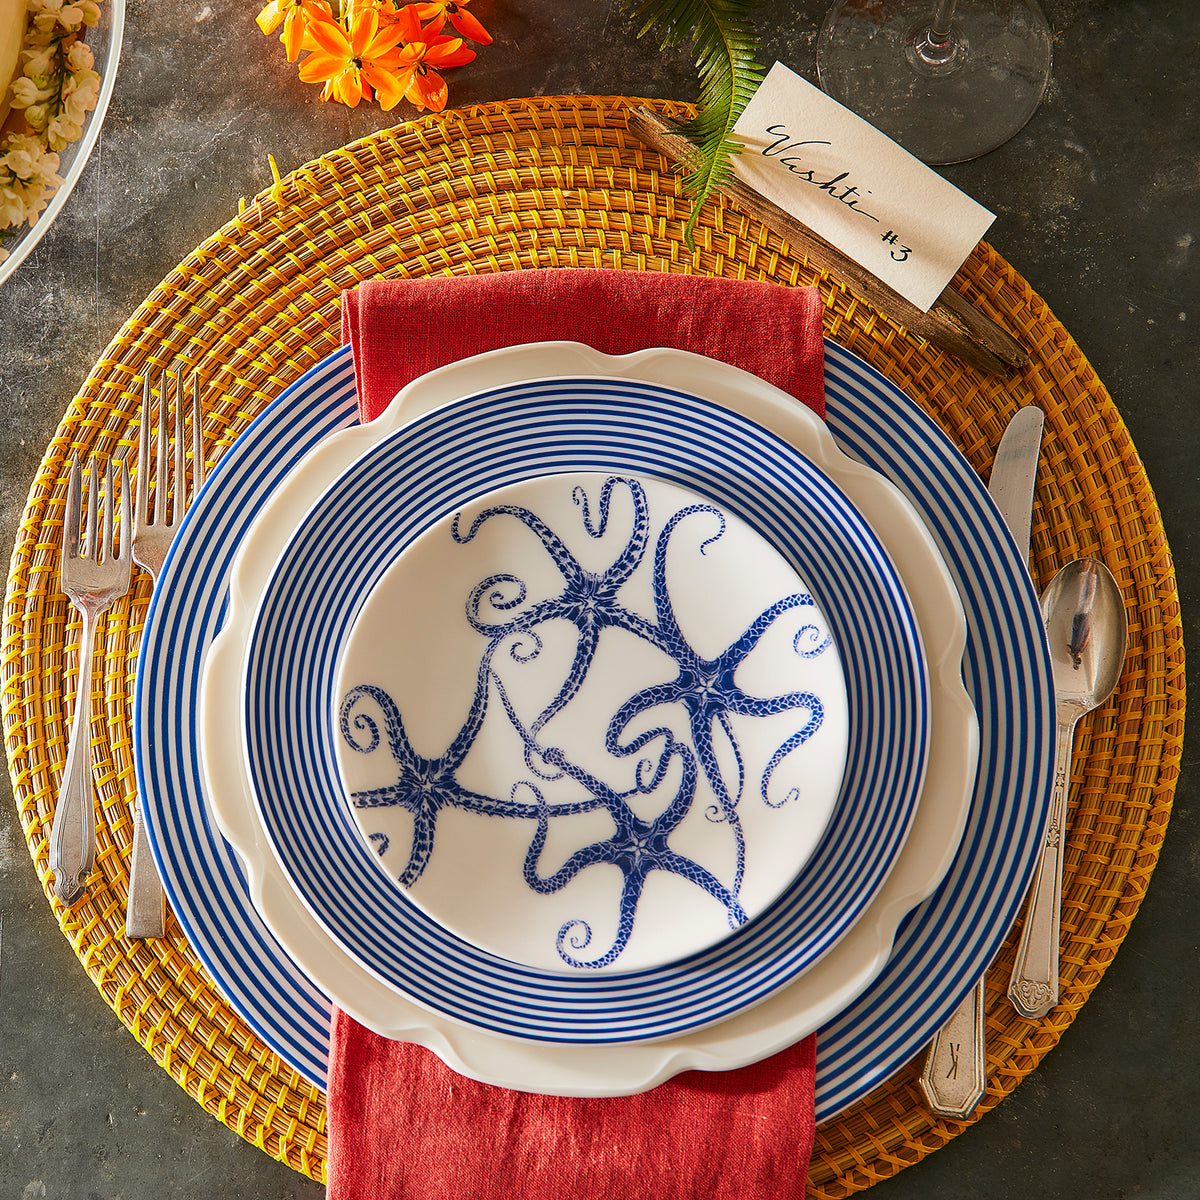 Table setting featuring heirloom-quality dinnerware with a blue and white Starfish Small Plate by Caskata Artisanal Home, a yellow woven placemat, red napkin, and utensils. A lead-free porcelain name card with &quot;Gaston&quot; is placed in the top right corner.